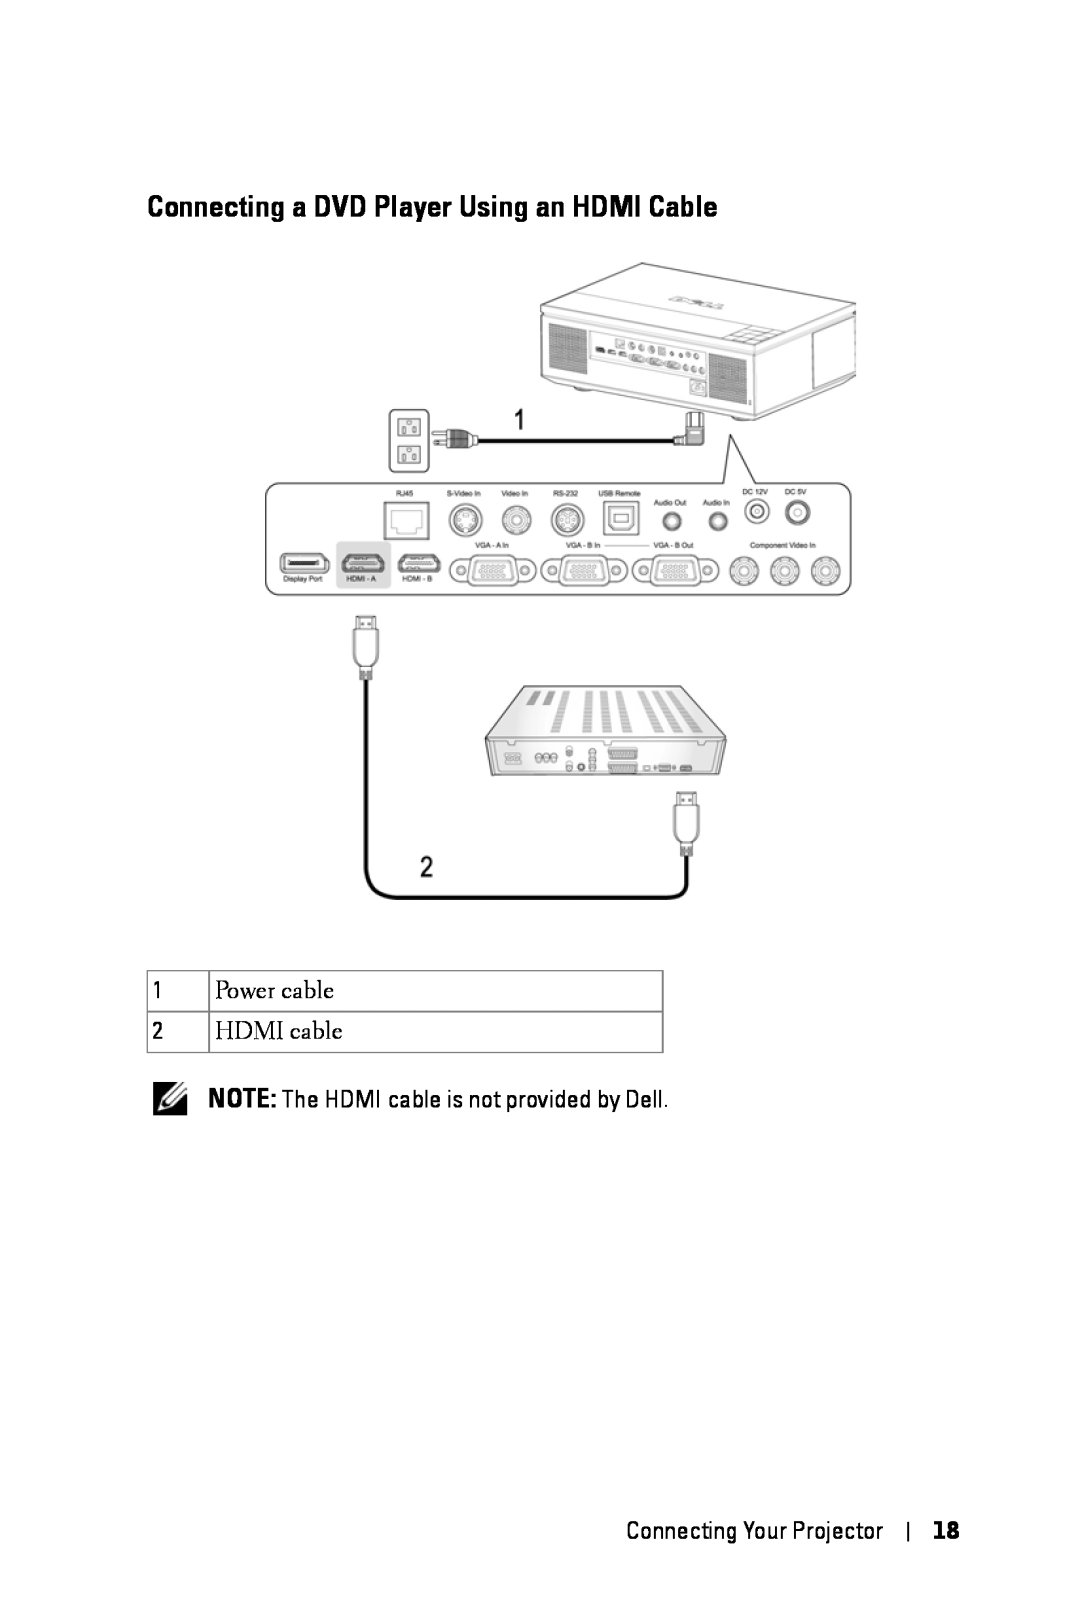 Dell 7609WU manual Connecting a DVD Player Using an HDMI Cable, Power cable 2 HDMI cable, Connecting Your Projector 